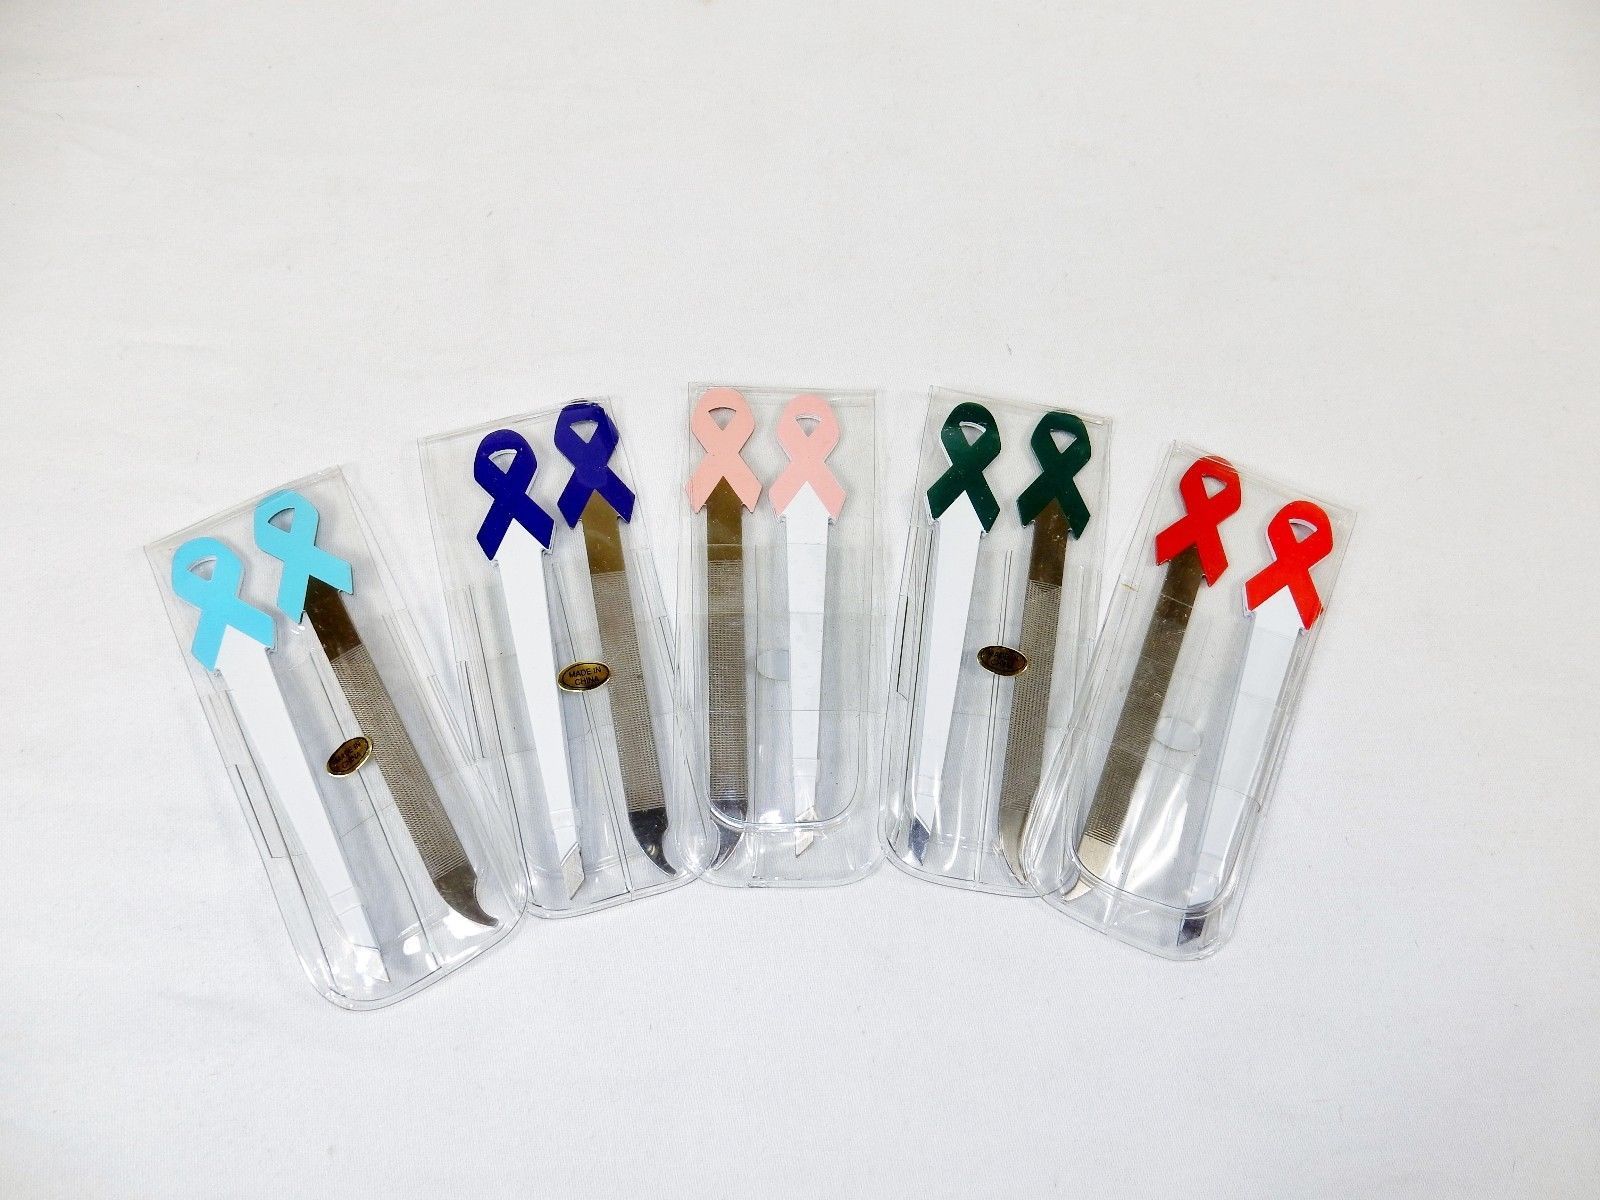 Cuticle Tools w/Support Ribbon Handles ~ Tweezers & File, Plastic Storage Pouch - $8.95